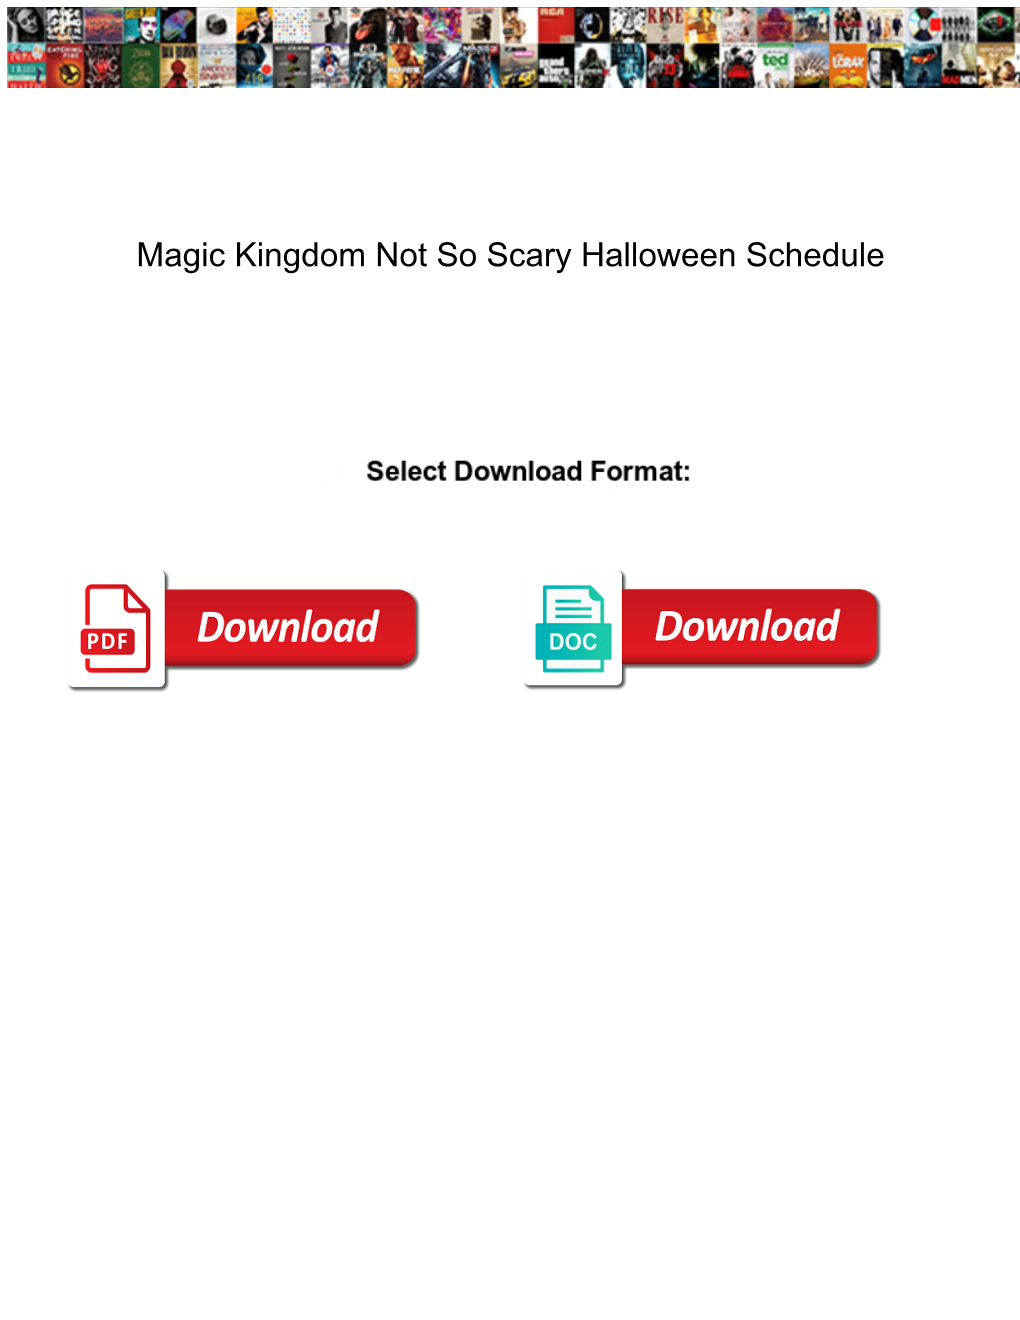 Magic Kingdom Not So Scary Halloween Schedule